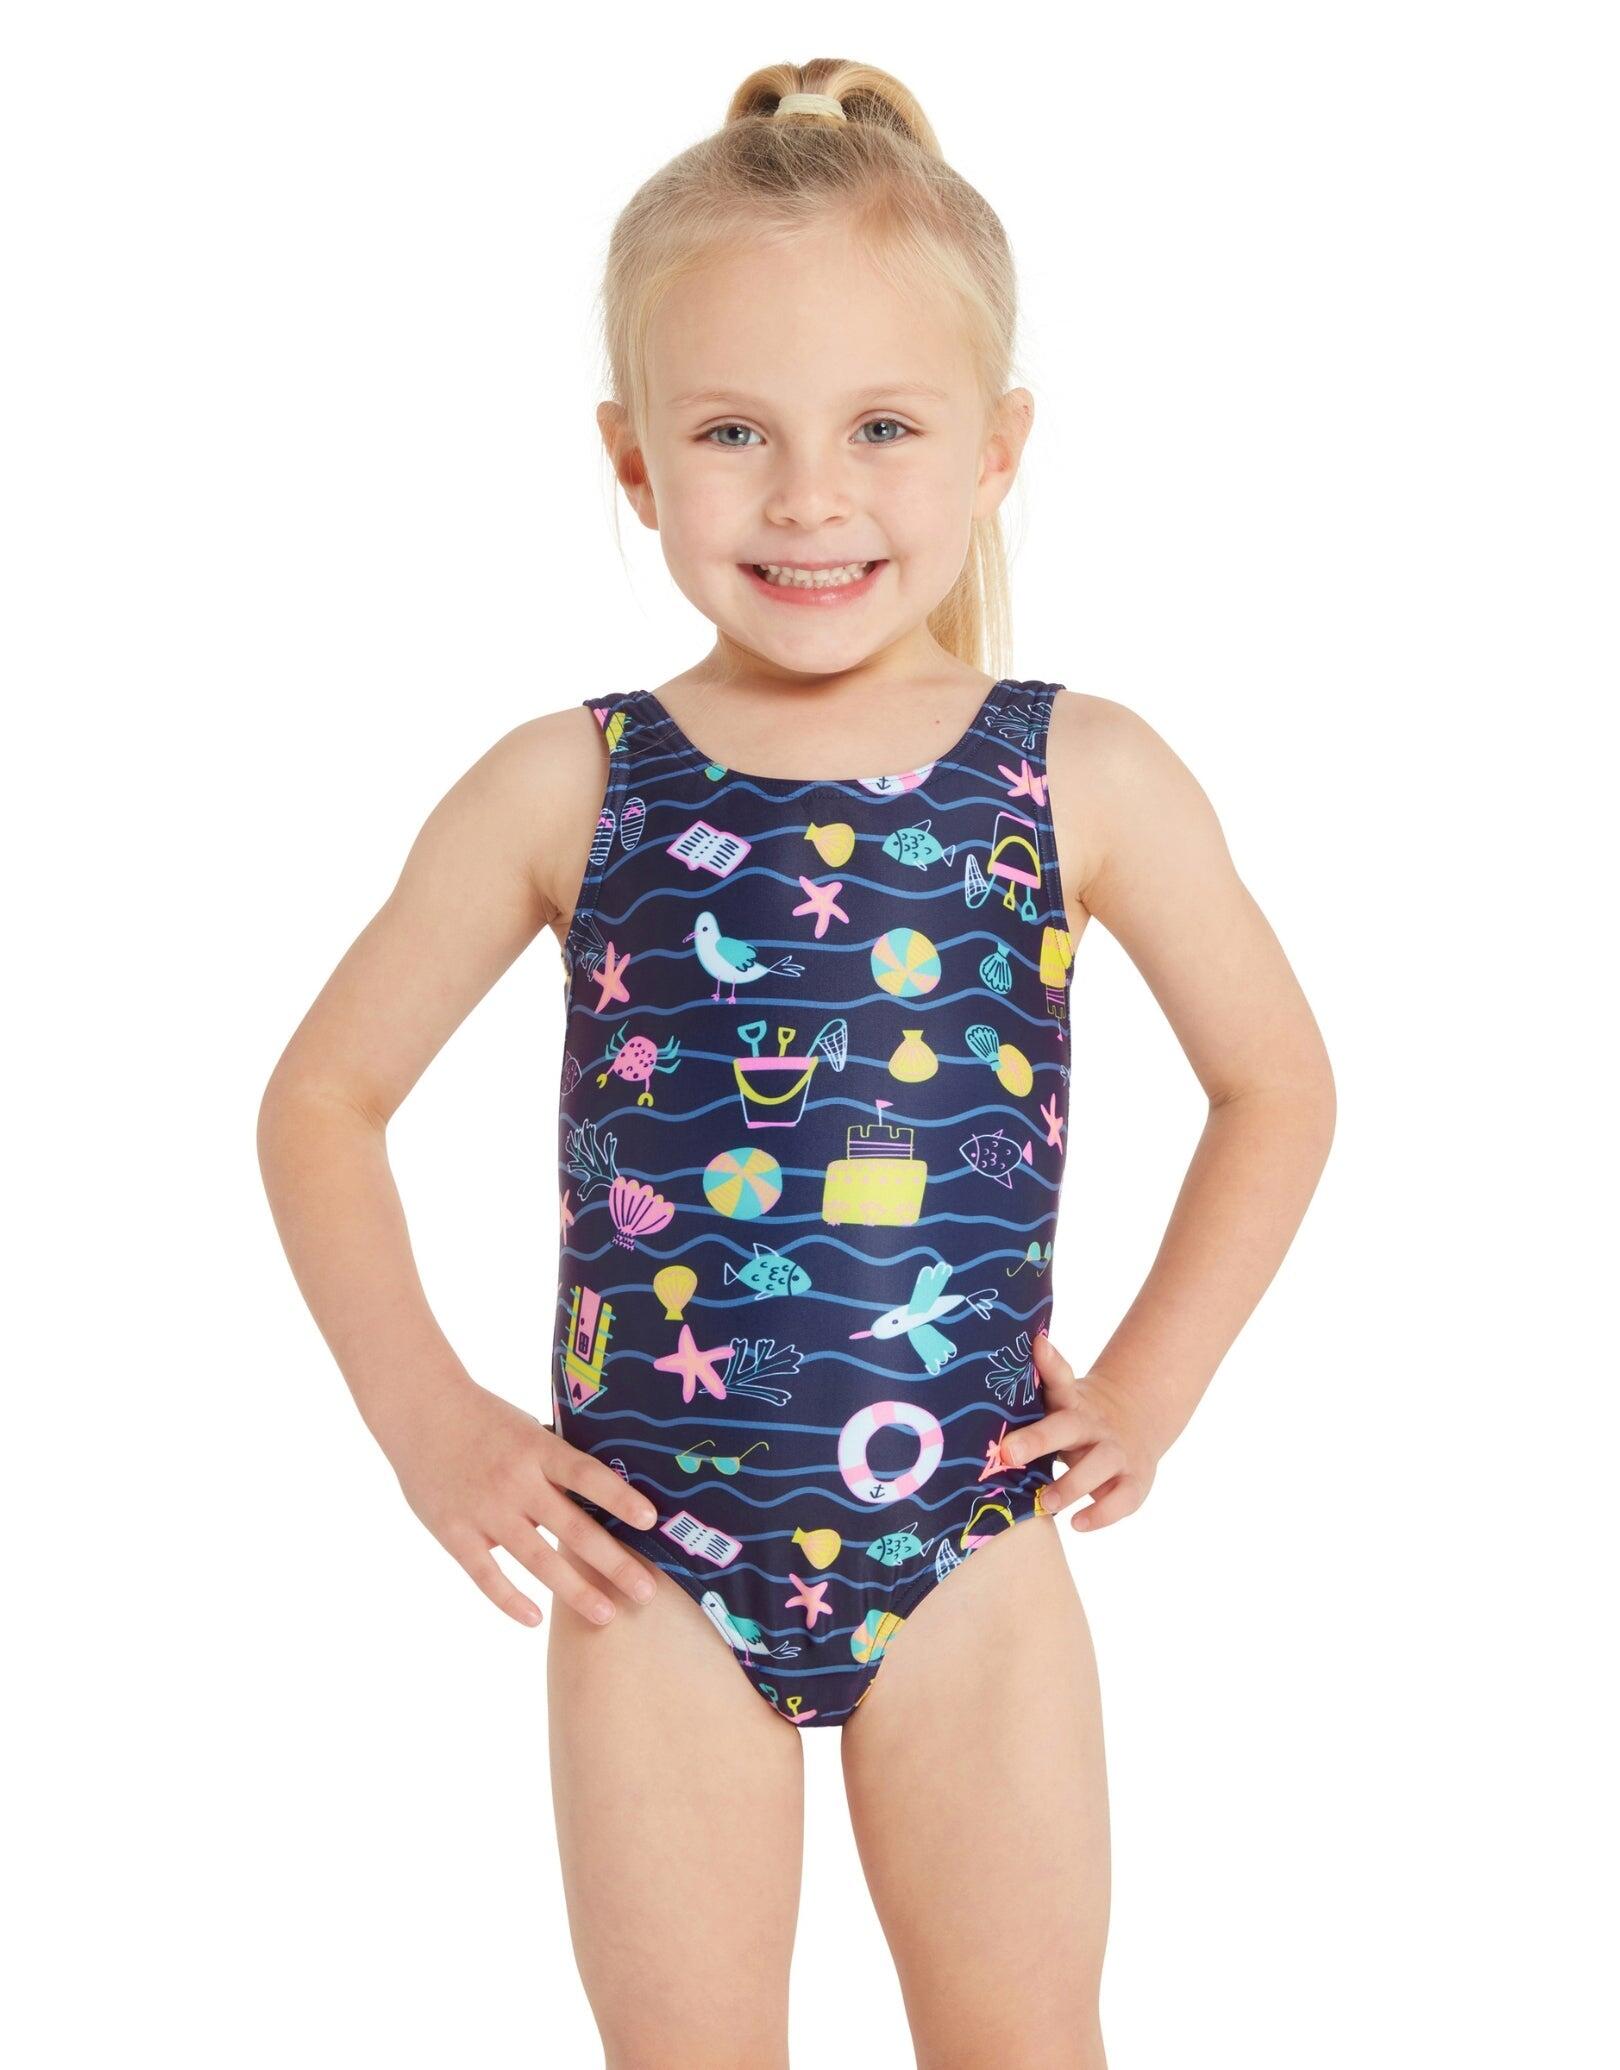 ZOGGS Zoggs Tots Girls Holly Day Scoopback Swimsuit - Navy/Multi